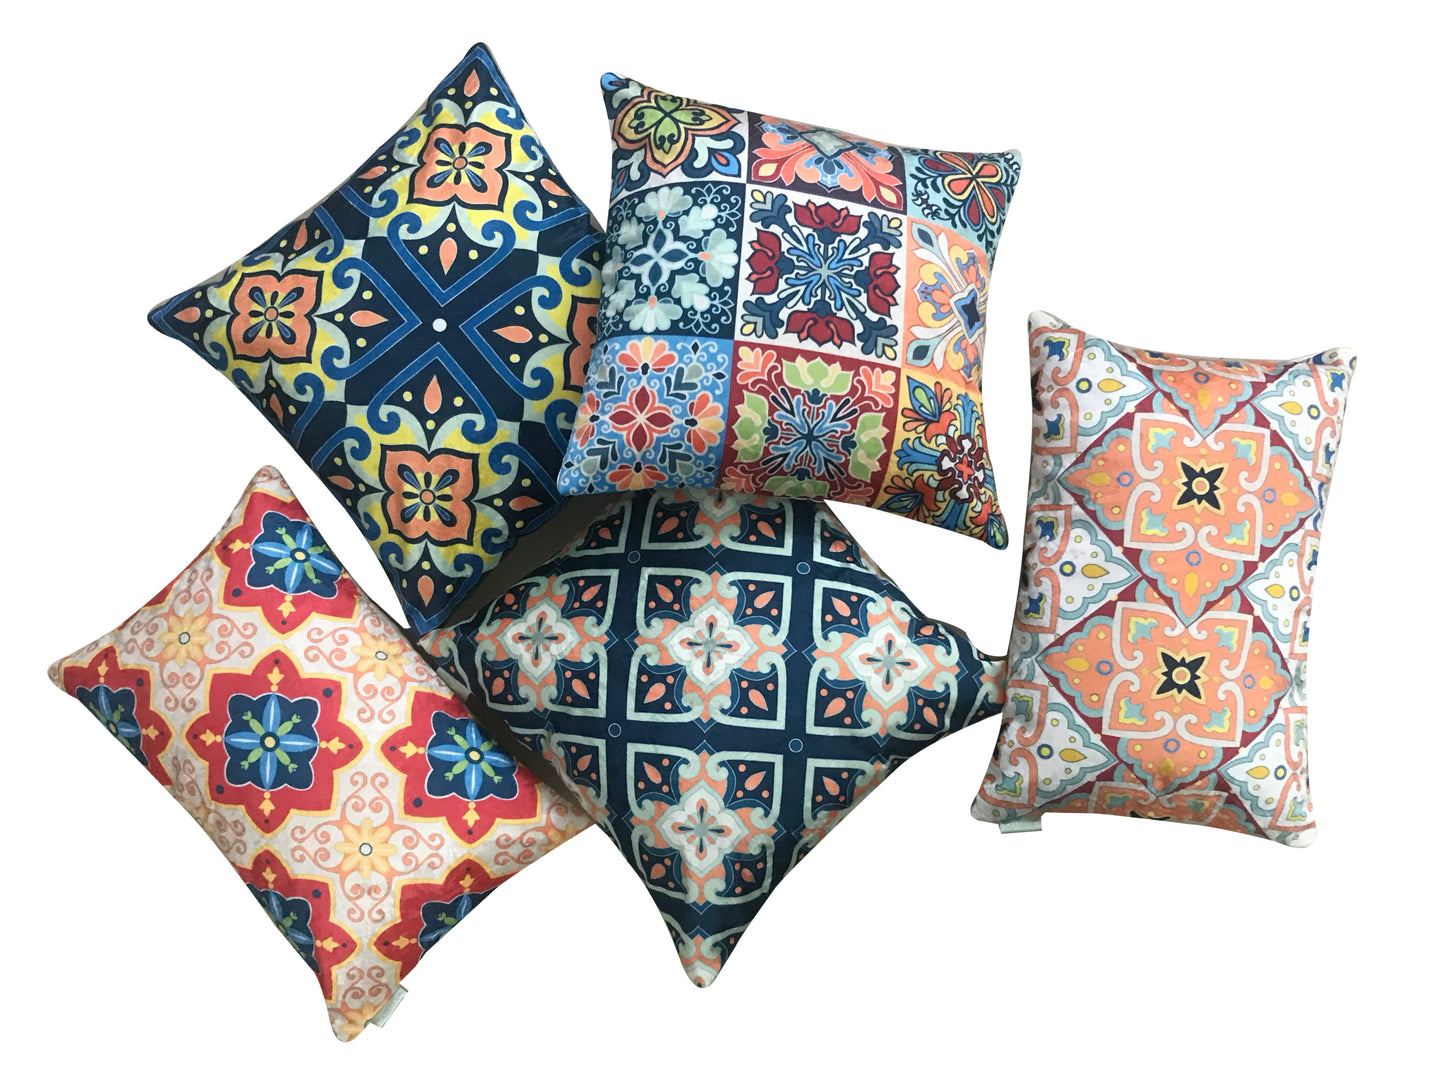 Ziao Mix Moroccan Velvet Cushion Cover